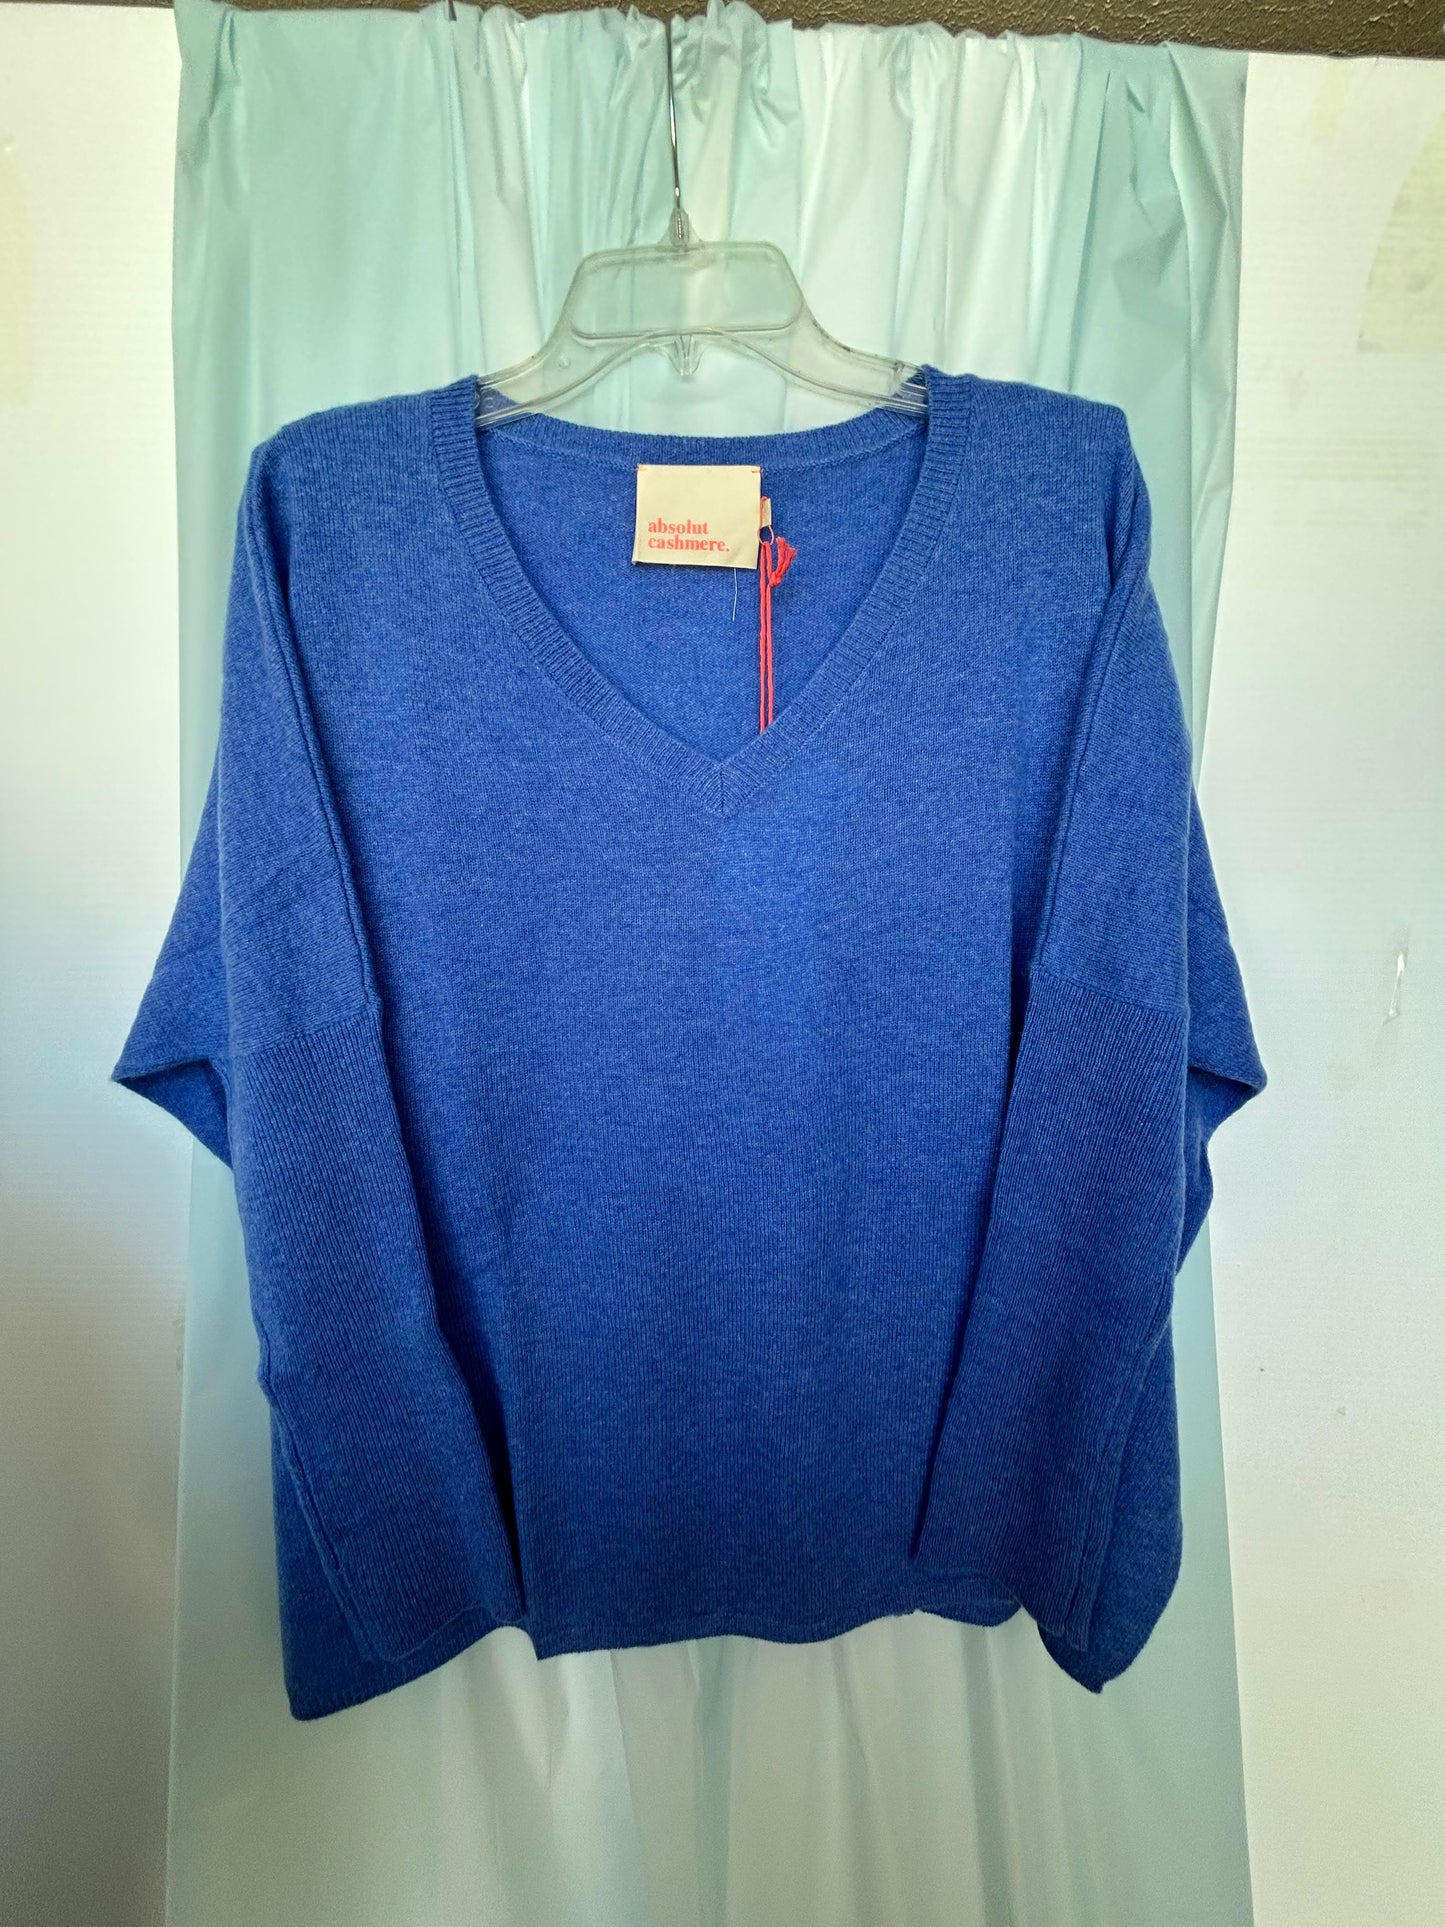 Absolute Cashmere Camille V-Neck Sweater